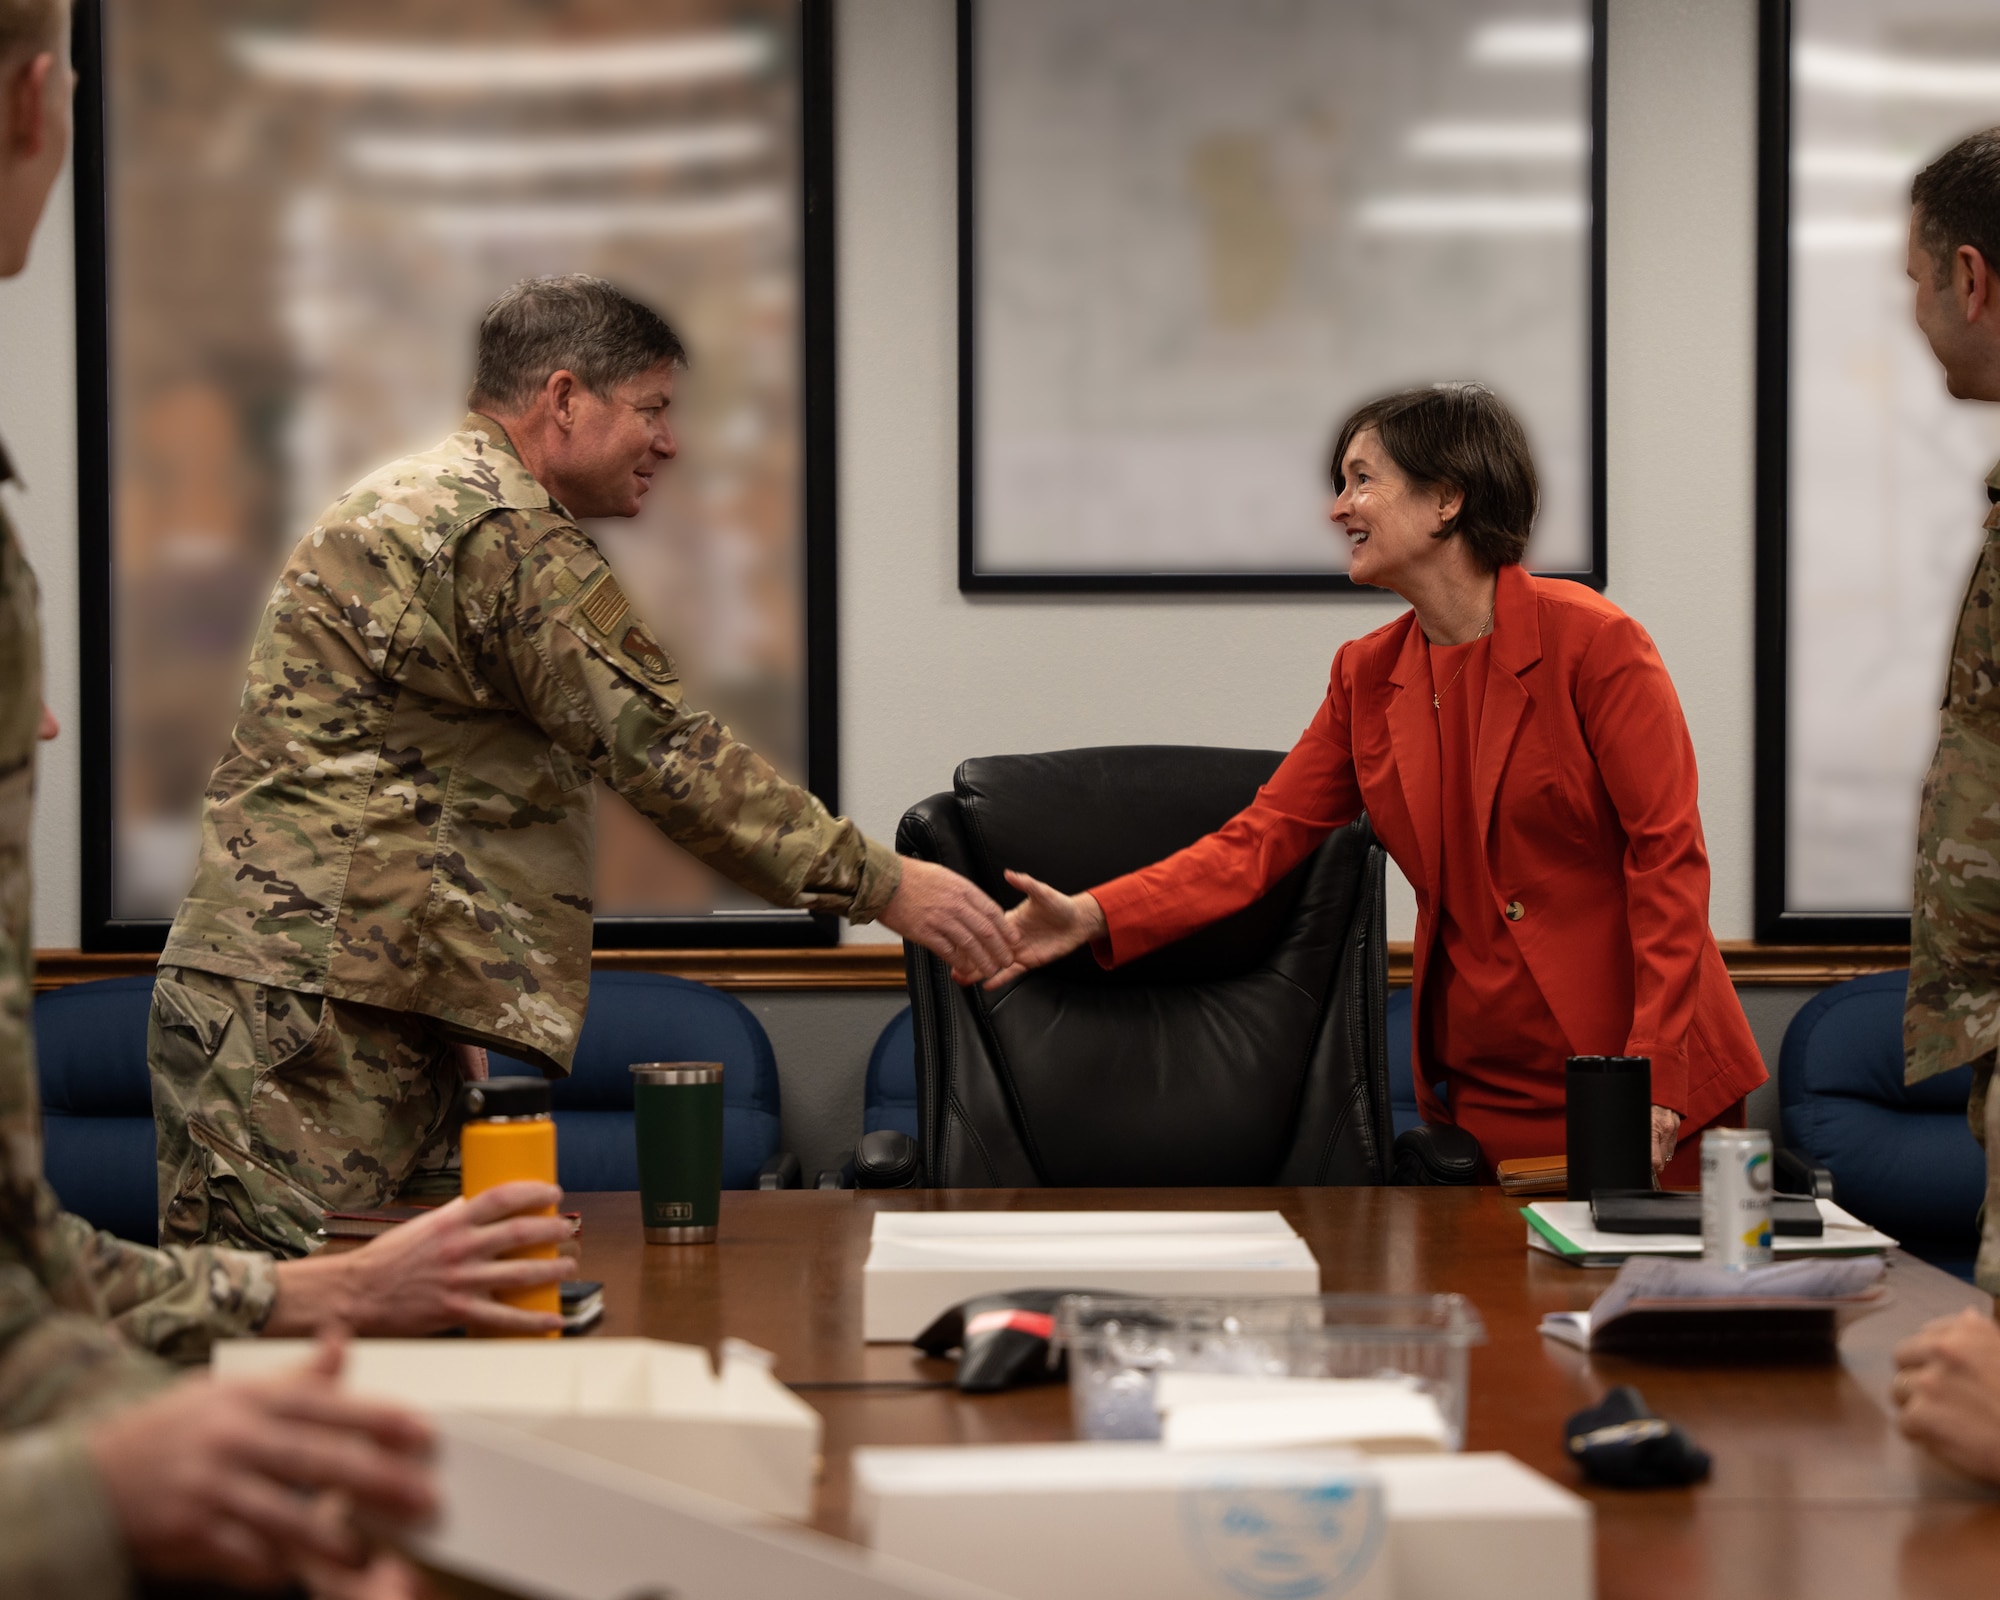 U.S. Air Force Col. Barry Roche, 27th Special Operations Mission Support Group commander, greets Susan Veazey, Regional Director of the Department of Defense’s Office of Local Defense Community Cooperation, for a meeting with the 27th SOMSG leadership at Cannon Air Force Base, N.M., April 24, 2024. OLDCC, in coordination with other federal agencies, delivers a program that enables states, local governments, and communities to increase military, civilian, and industrial readiness and resiliency, and support military families. (U.S. Air Force photo by Senior Airman Parra)